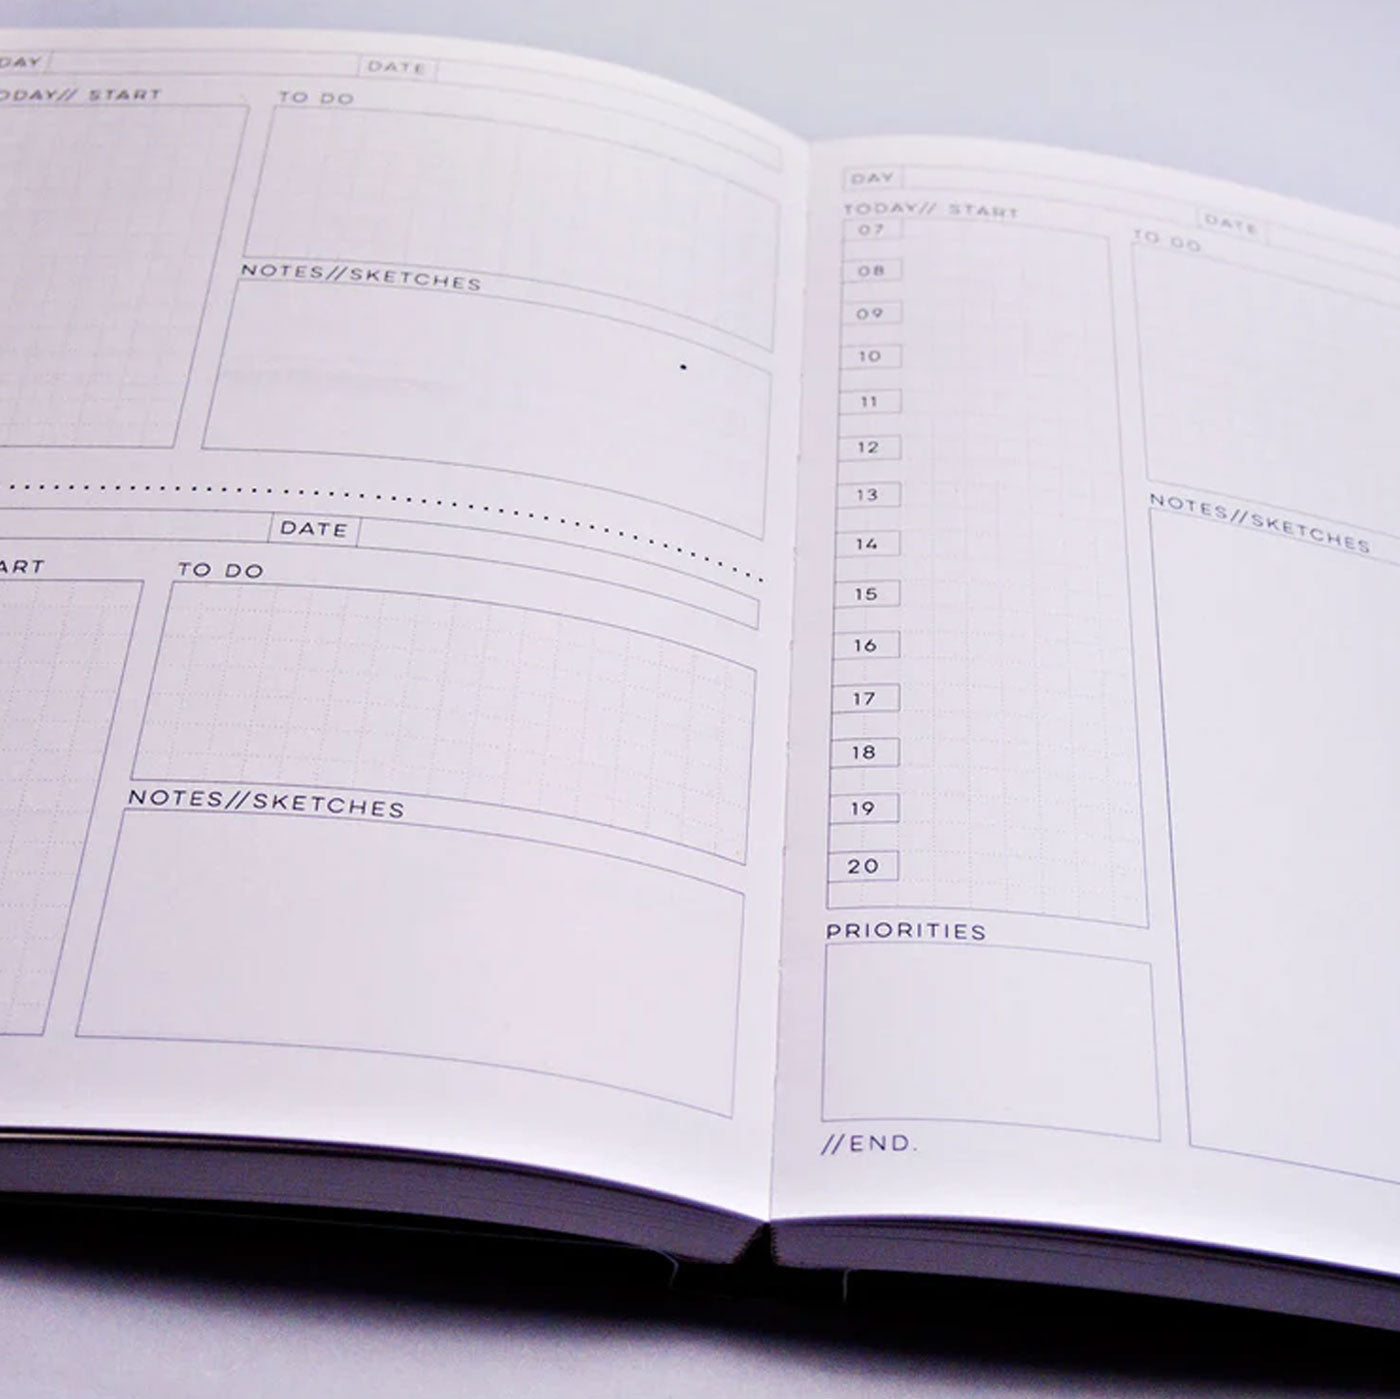 The Completist | Madrid Undated Daily Planner Book